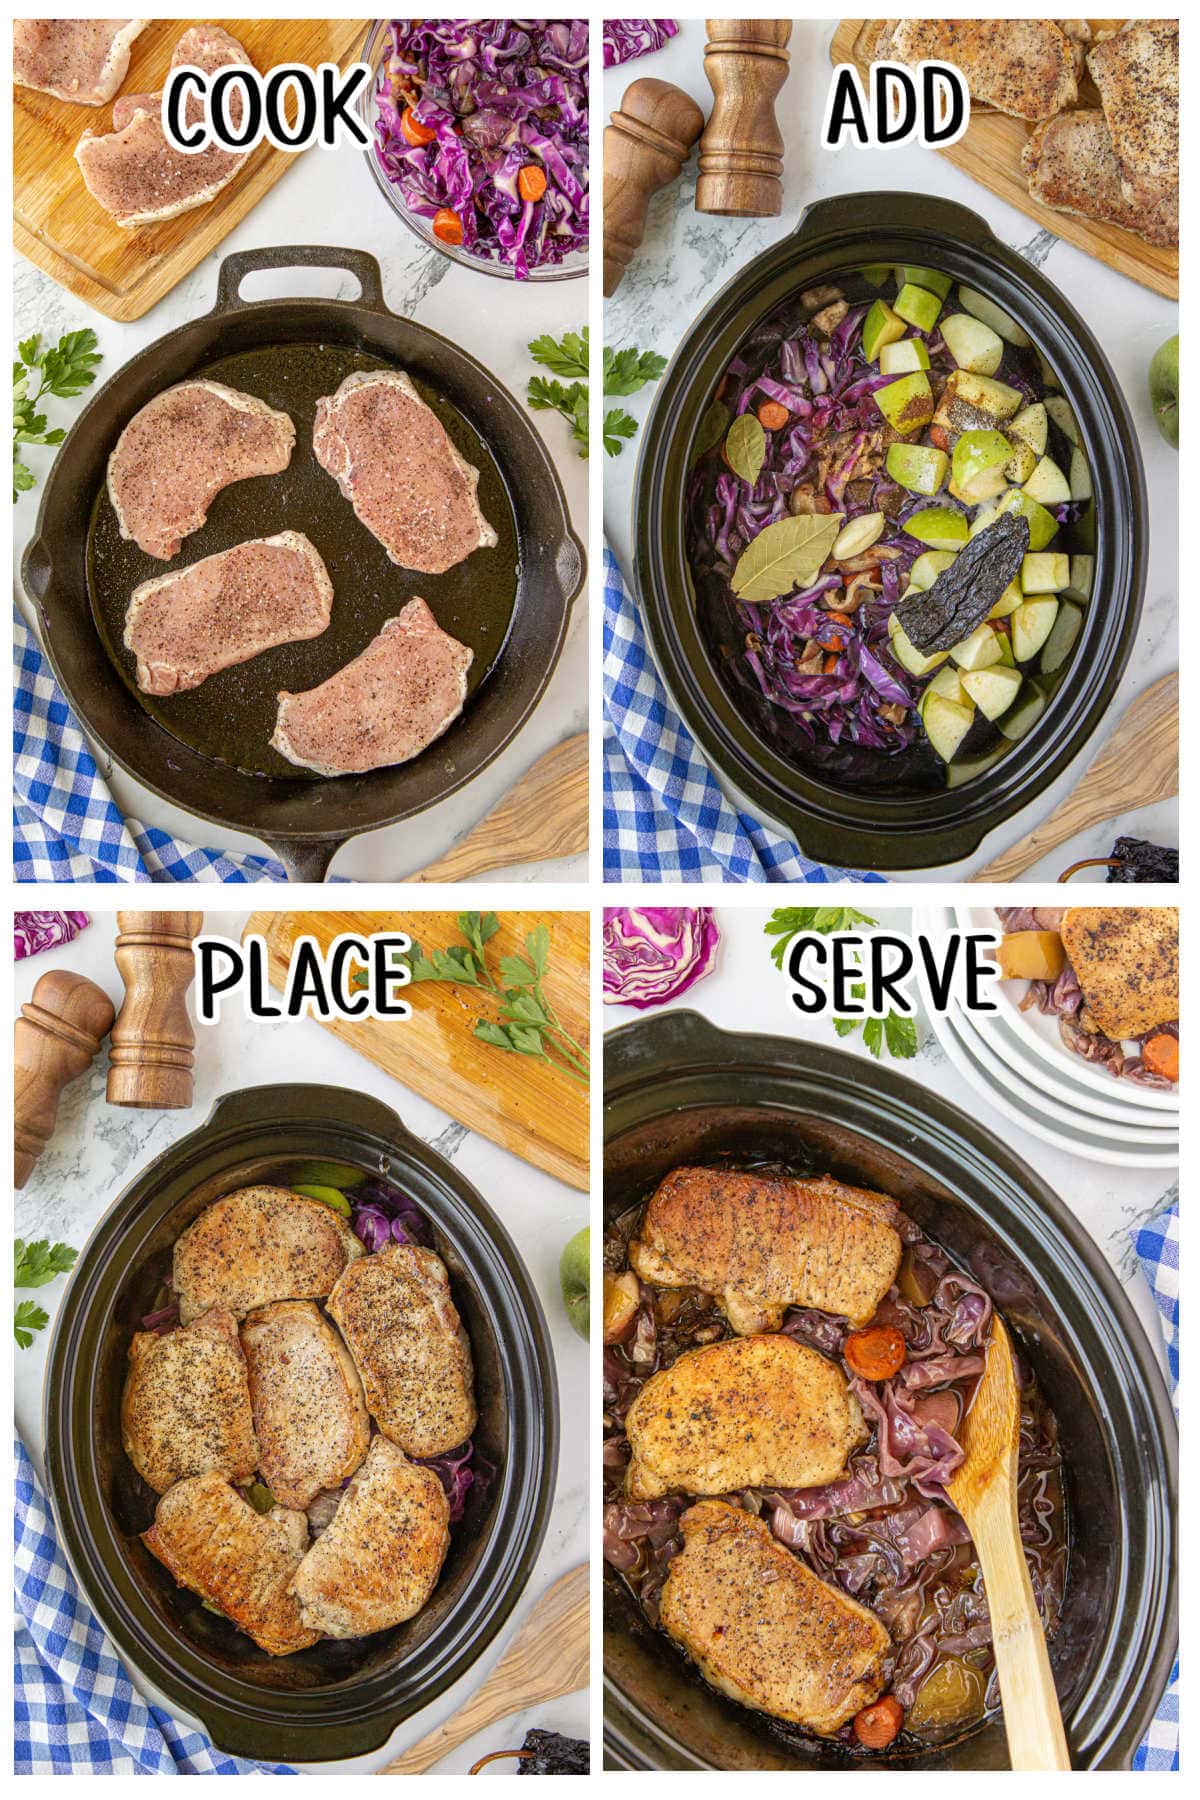 Step by step for Braised Pork and Red Cabbage.